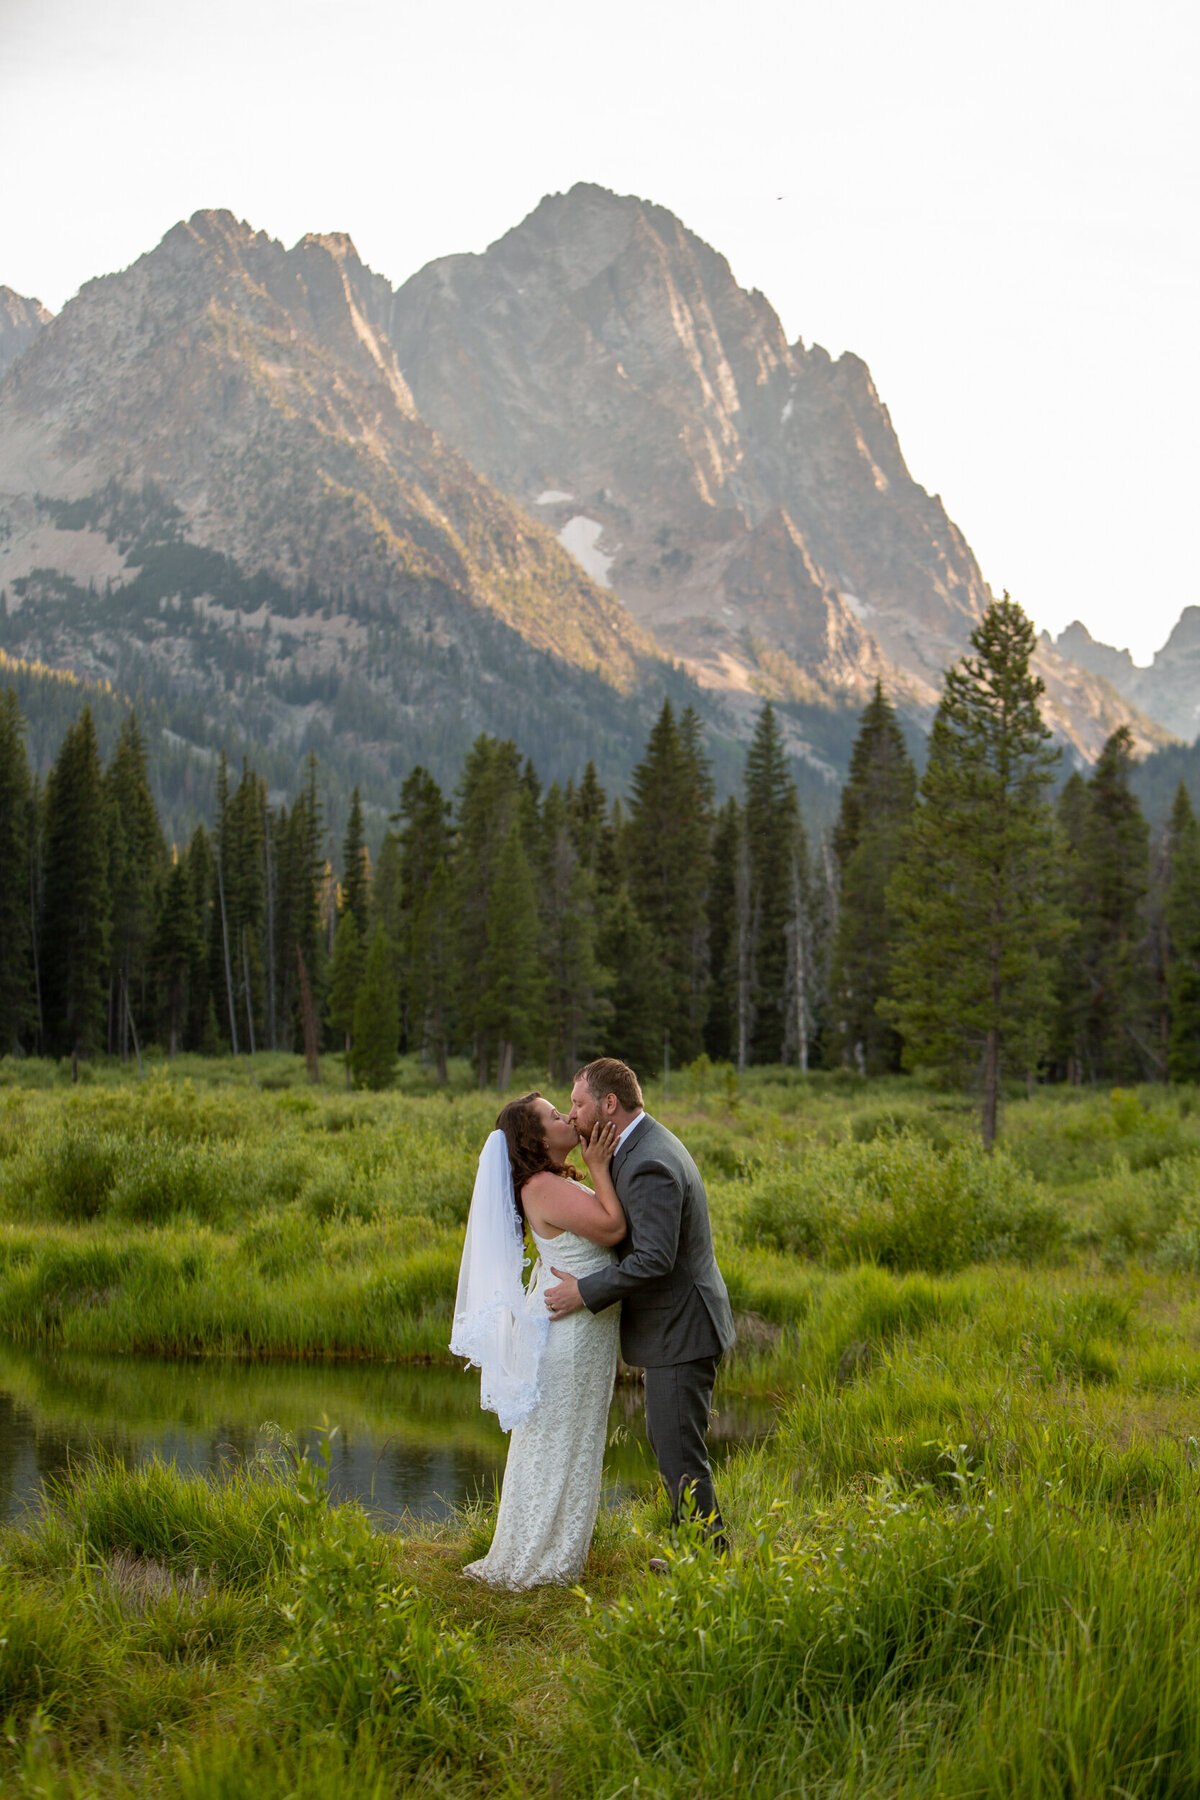 A bride and groom kiss after their Idaho elopement ceremony.